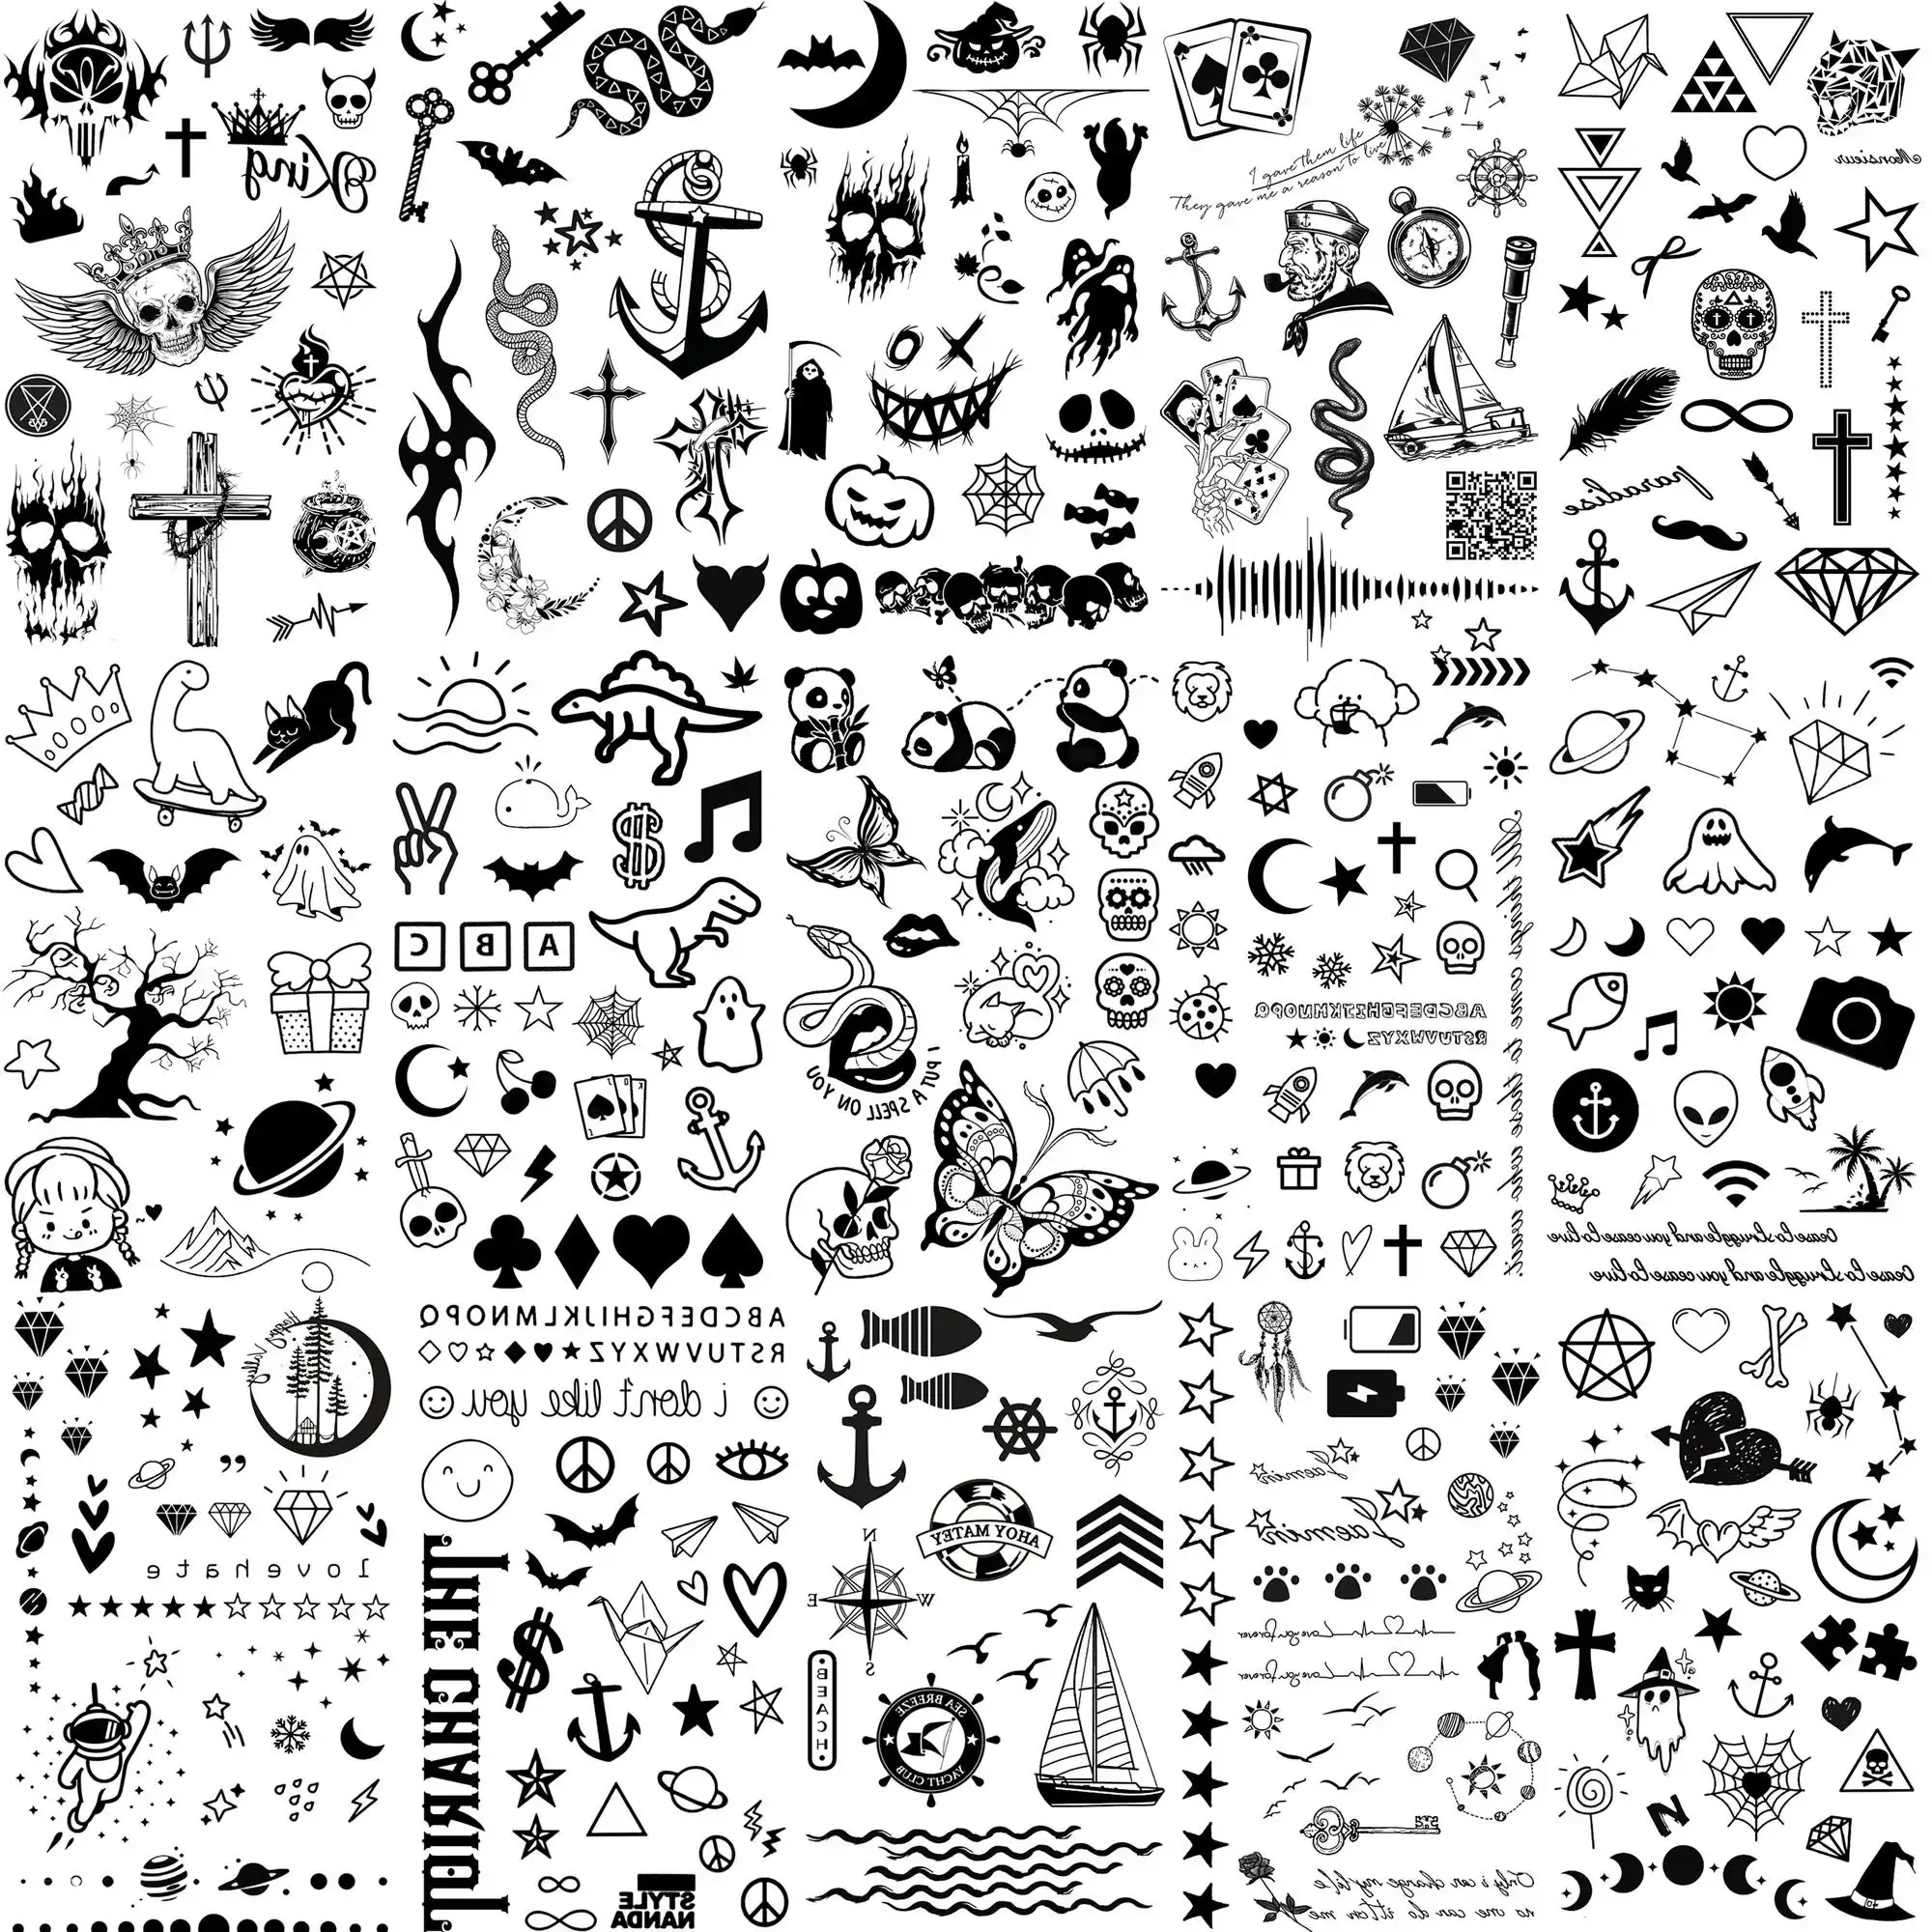 Tattoos 15 Sheets Small Temporary Tattoos For Women Adults Hands Neck Tattoo Sticker Tiny Fresh Pattern Moon Butterfly Fake Tattoo Paste